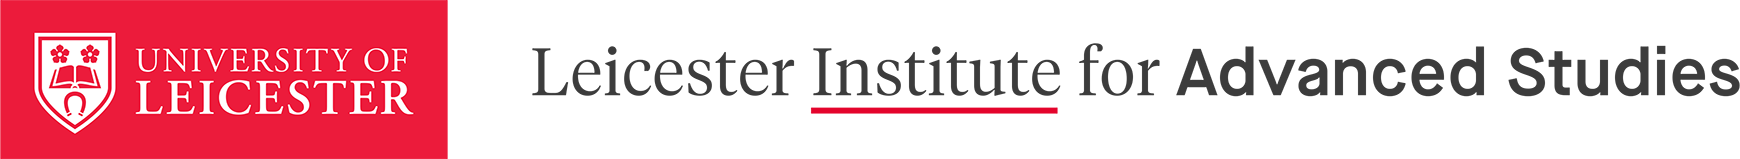 Logo of University of Leicester Institute for Advanced Studies